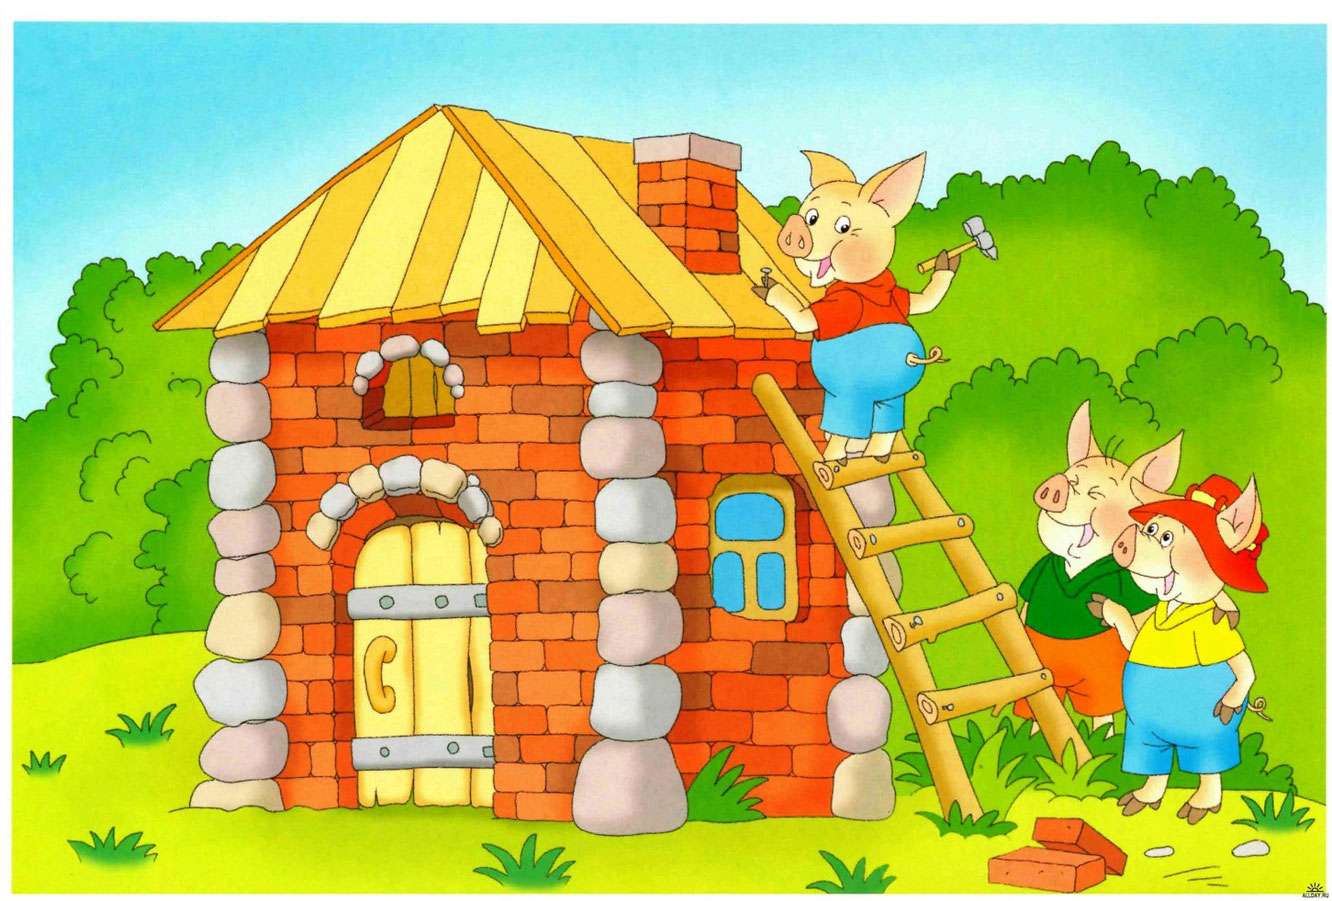 Fairy tale "The Three Little Pigs" online puzzle